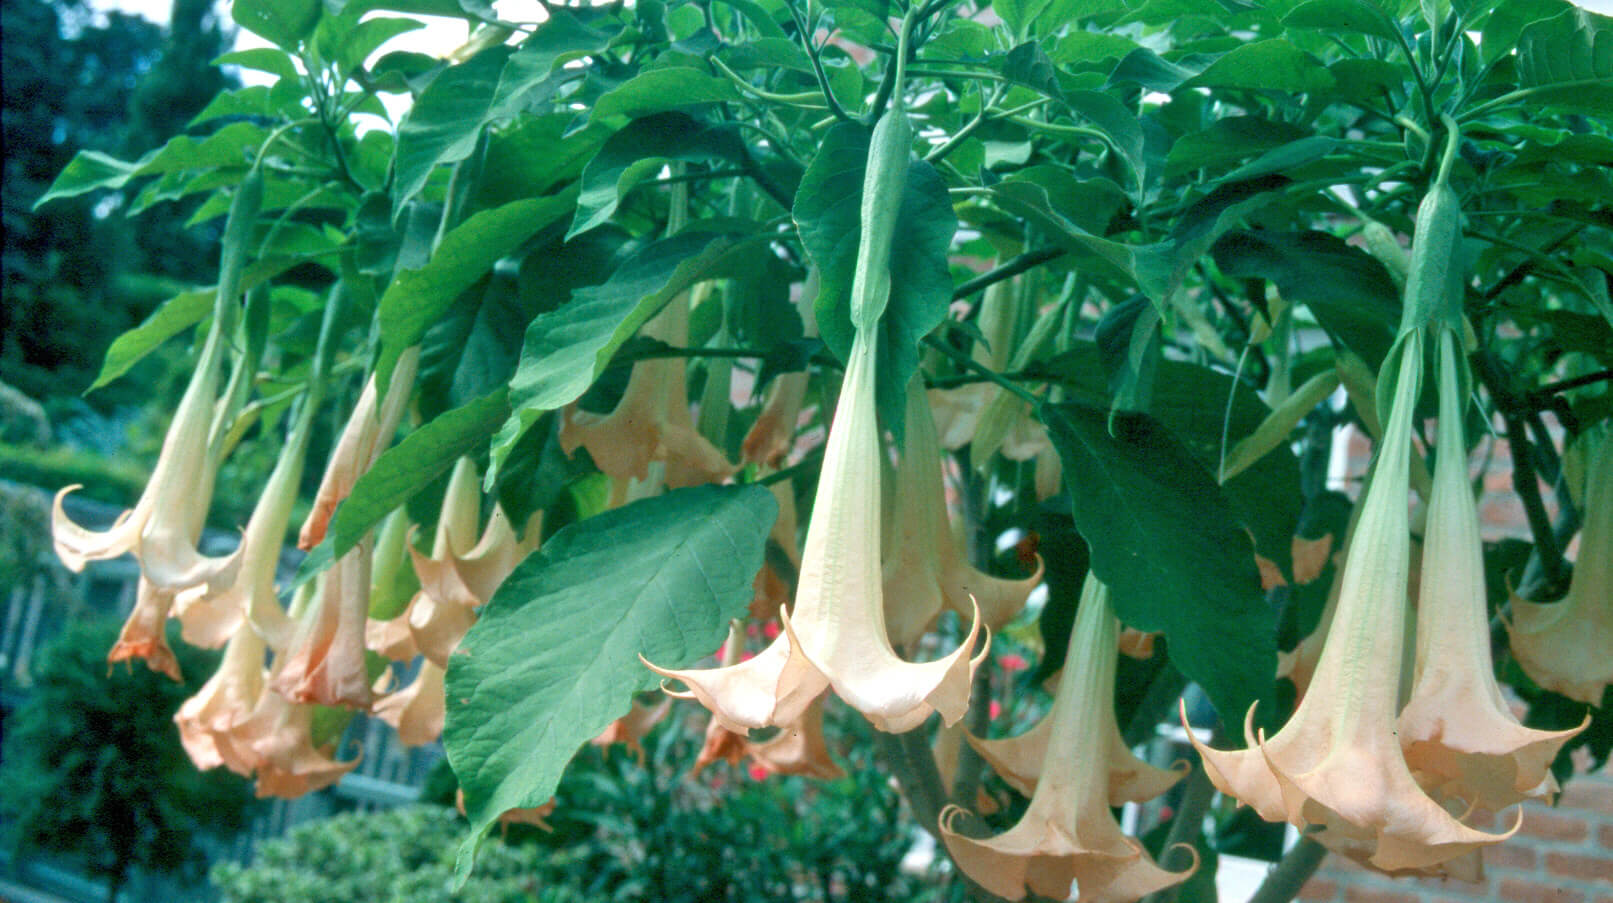 The large, drooping bells of Brugmansia flowers offer delicious evening fragrance.